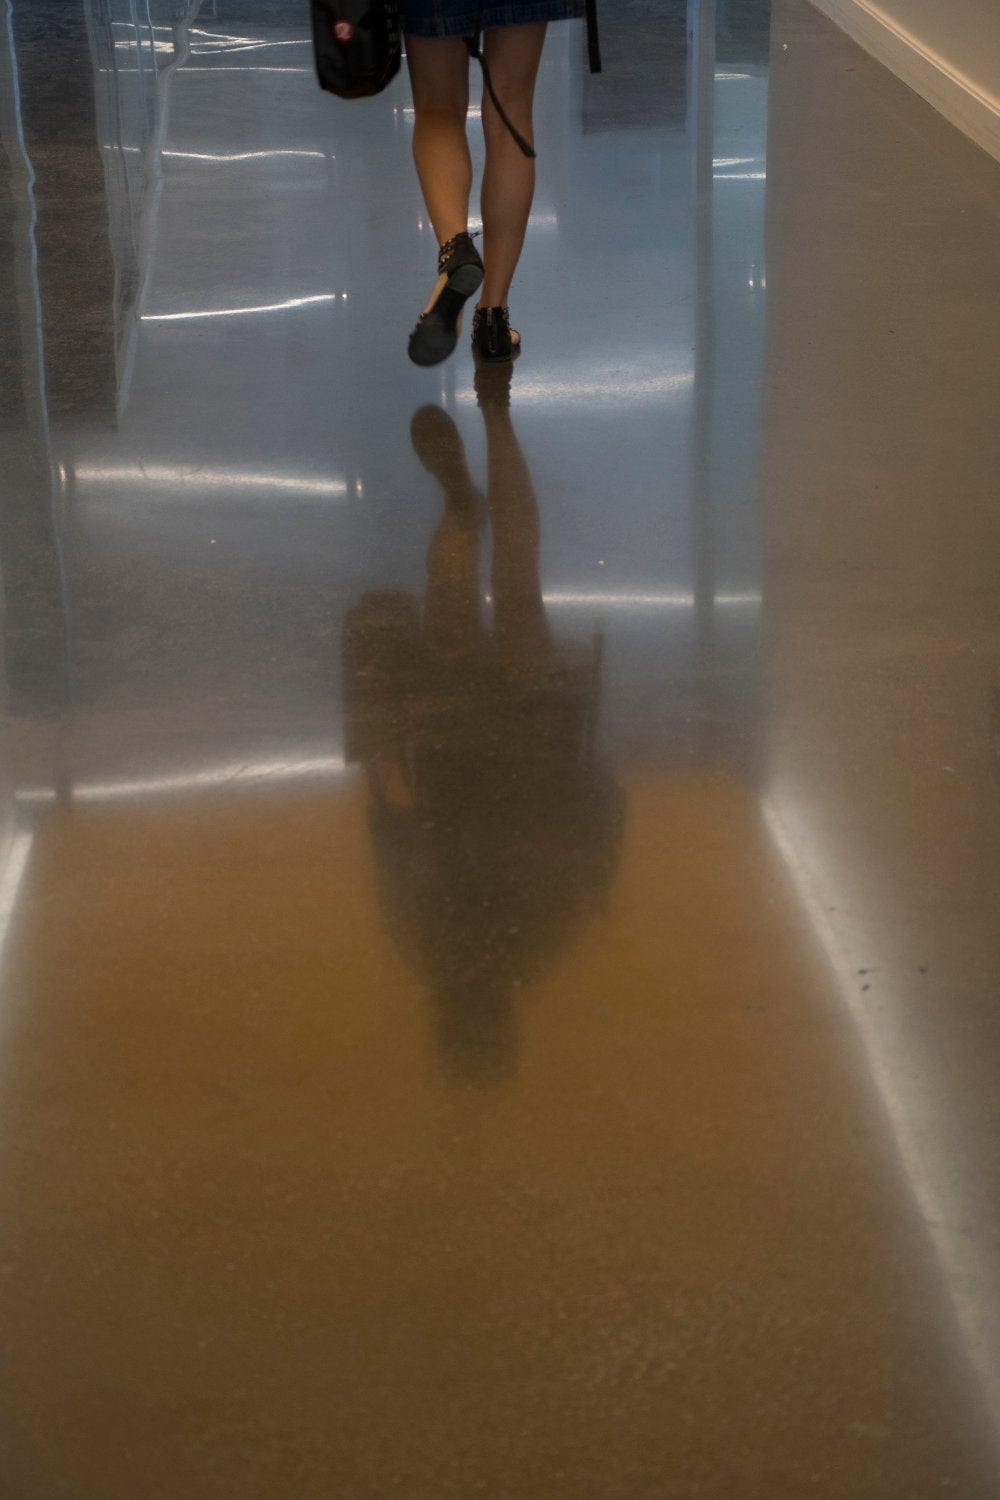 The smooth concrete hallway reflects the lights from the lighting above.